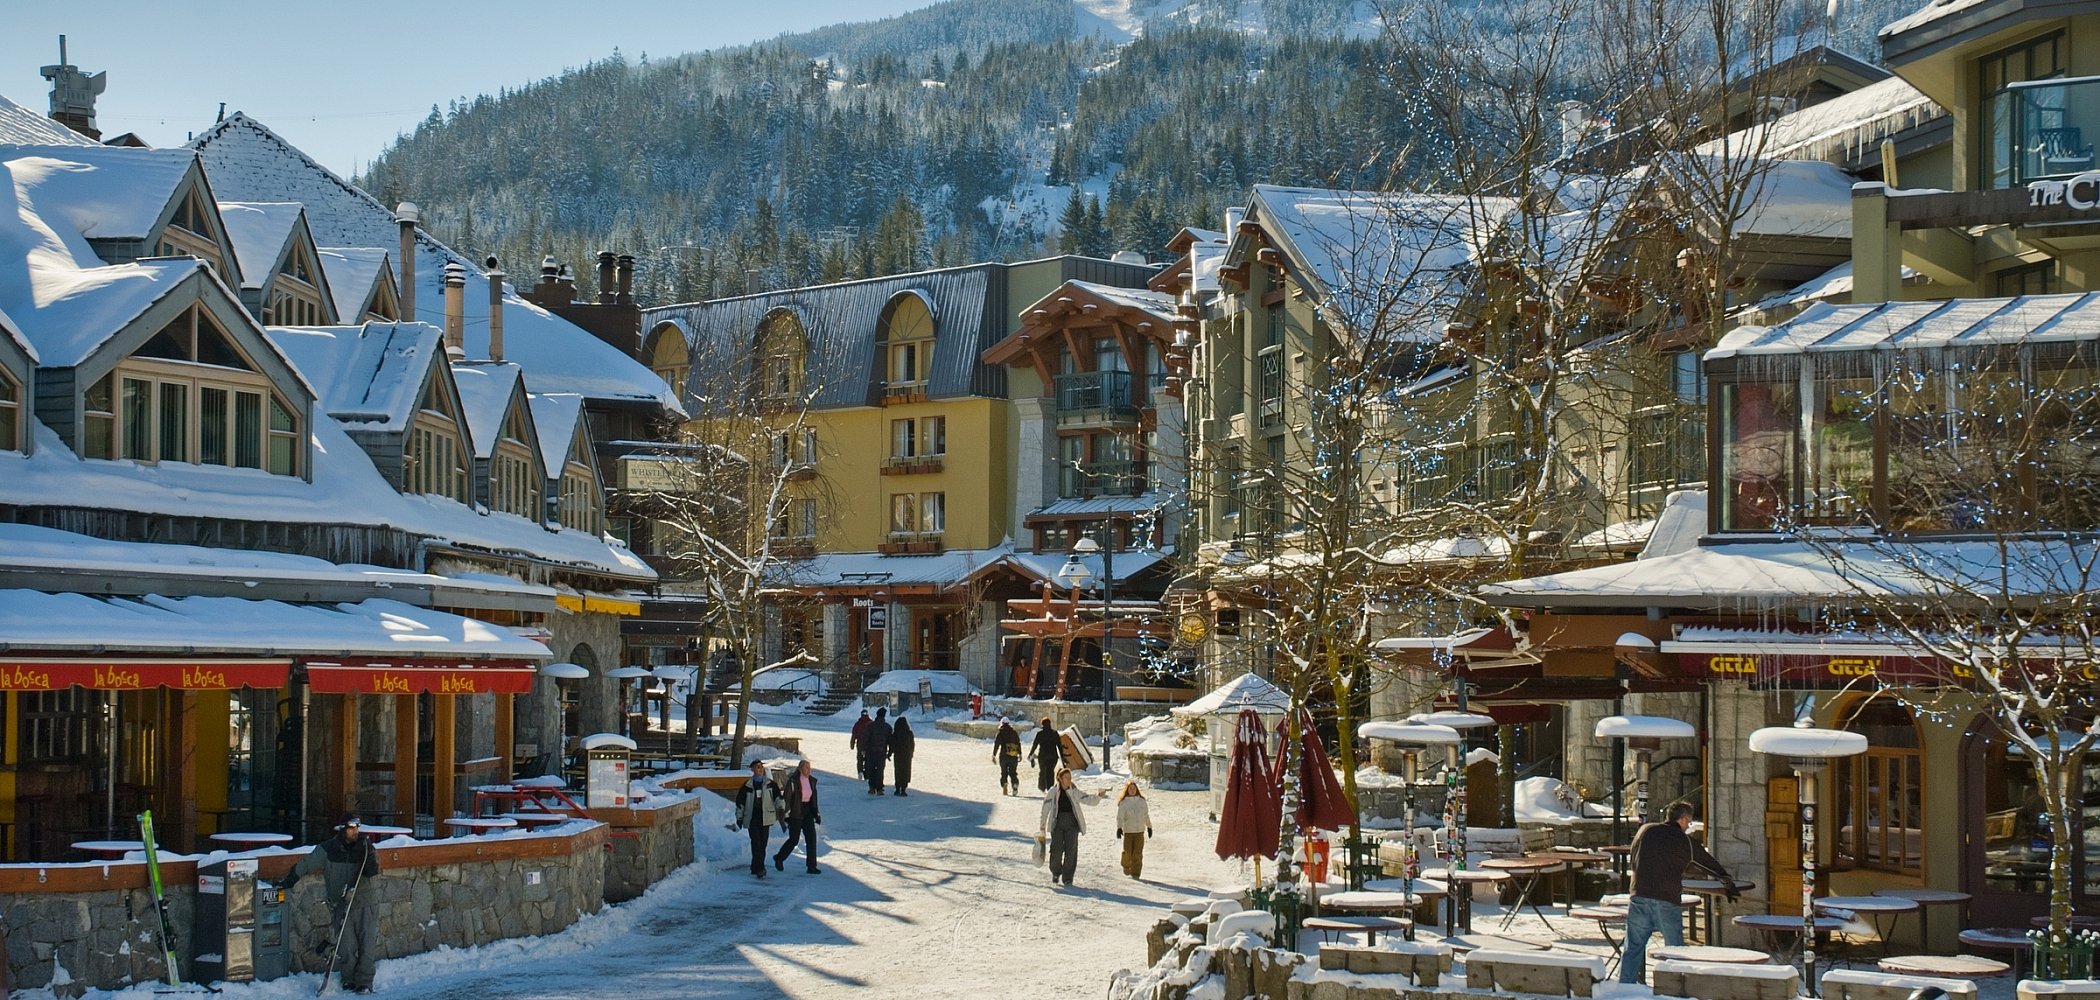 People walking through Whistler Village in winter with snow covered buildings.